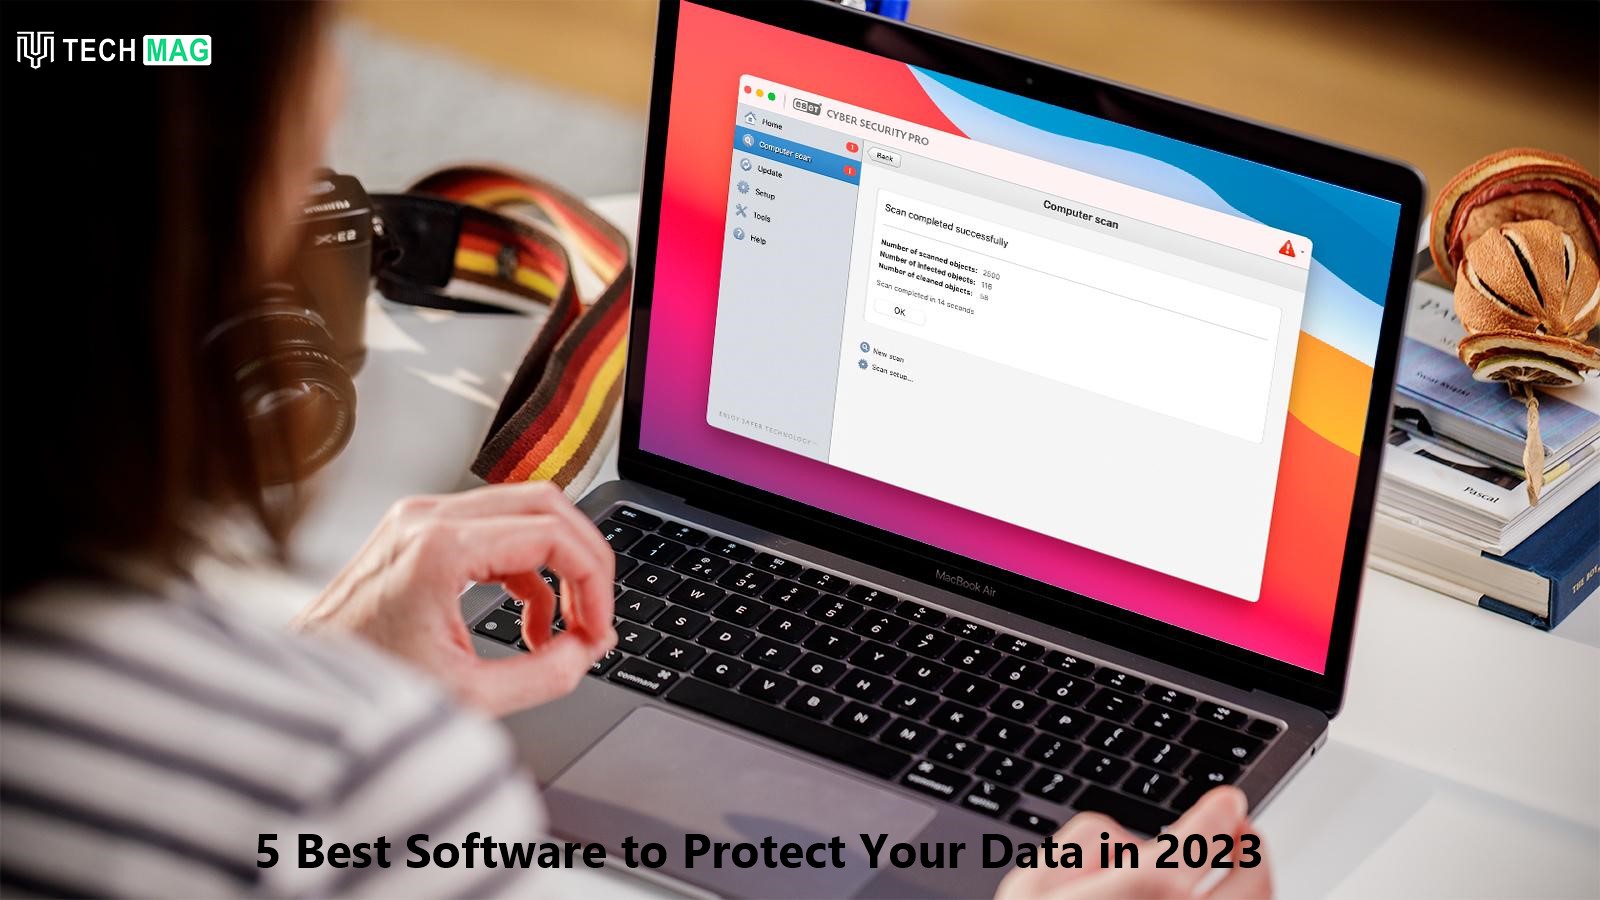 5 Best Software to Protect Your Data in 2023